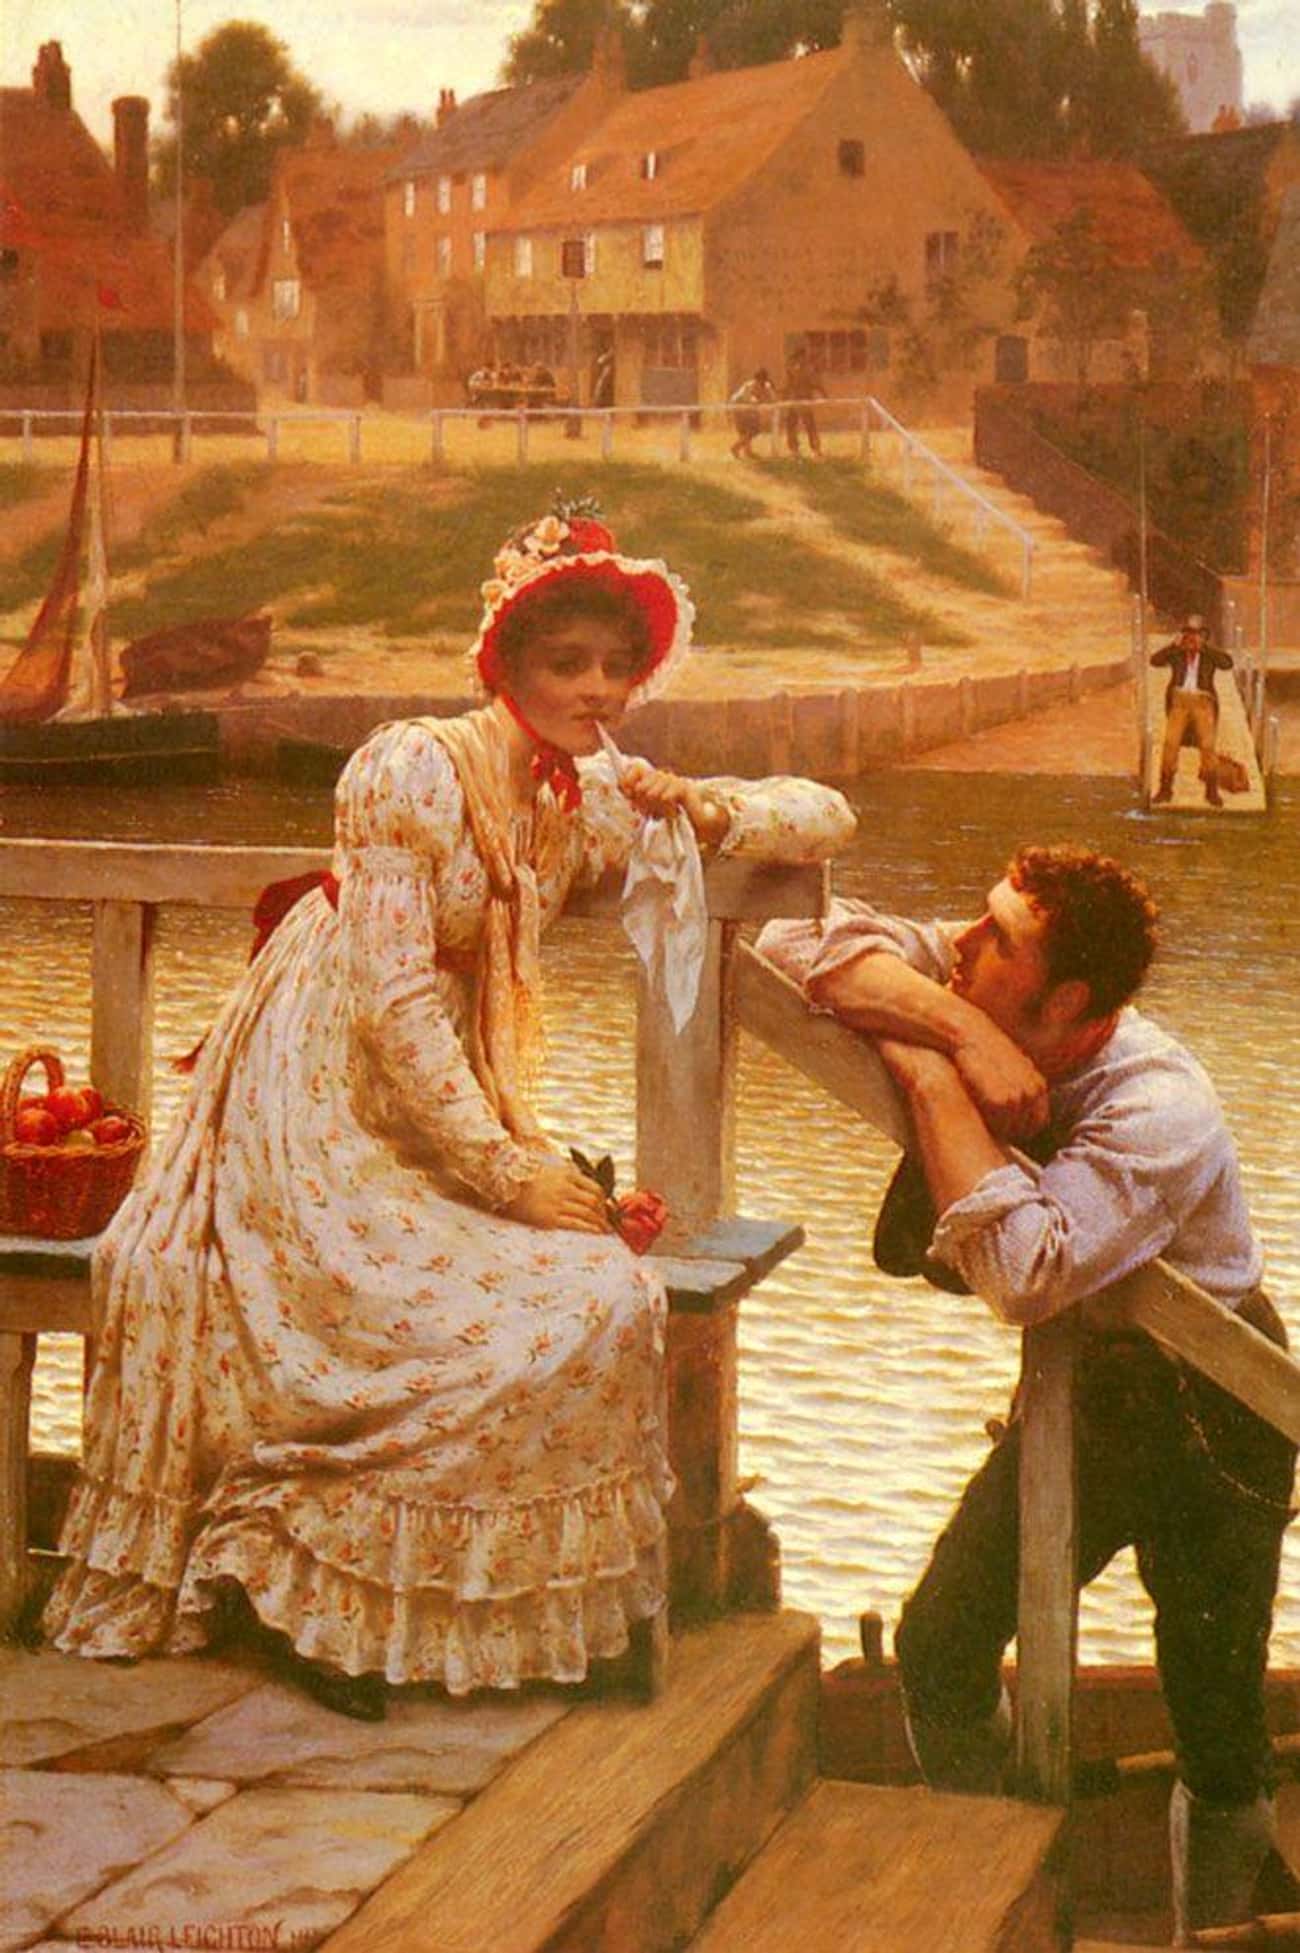 In Public, A Gentleman Should Show Constant Attention To His Intended